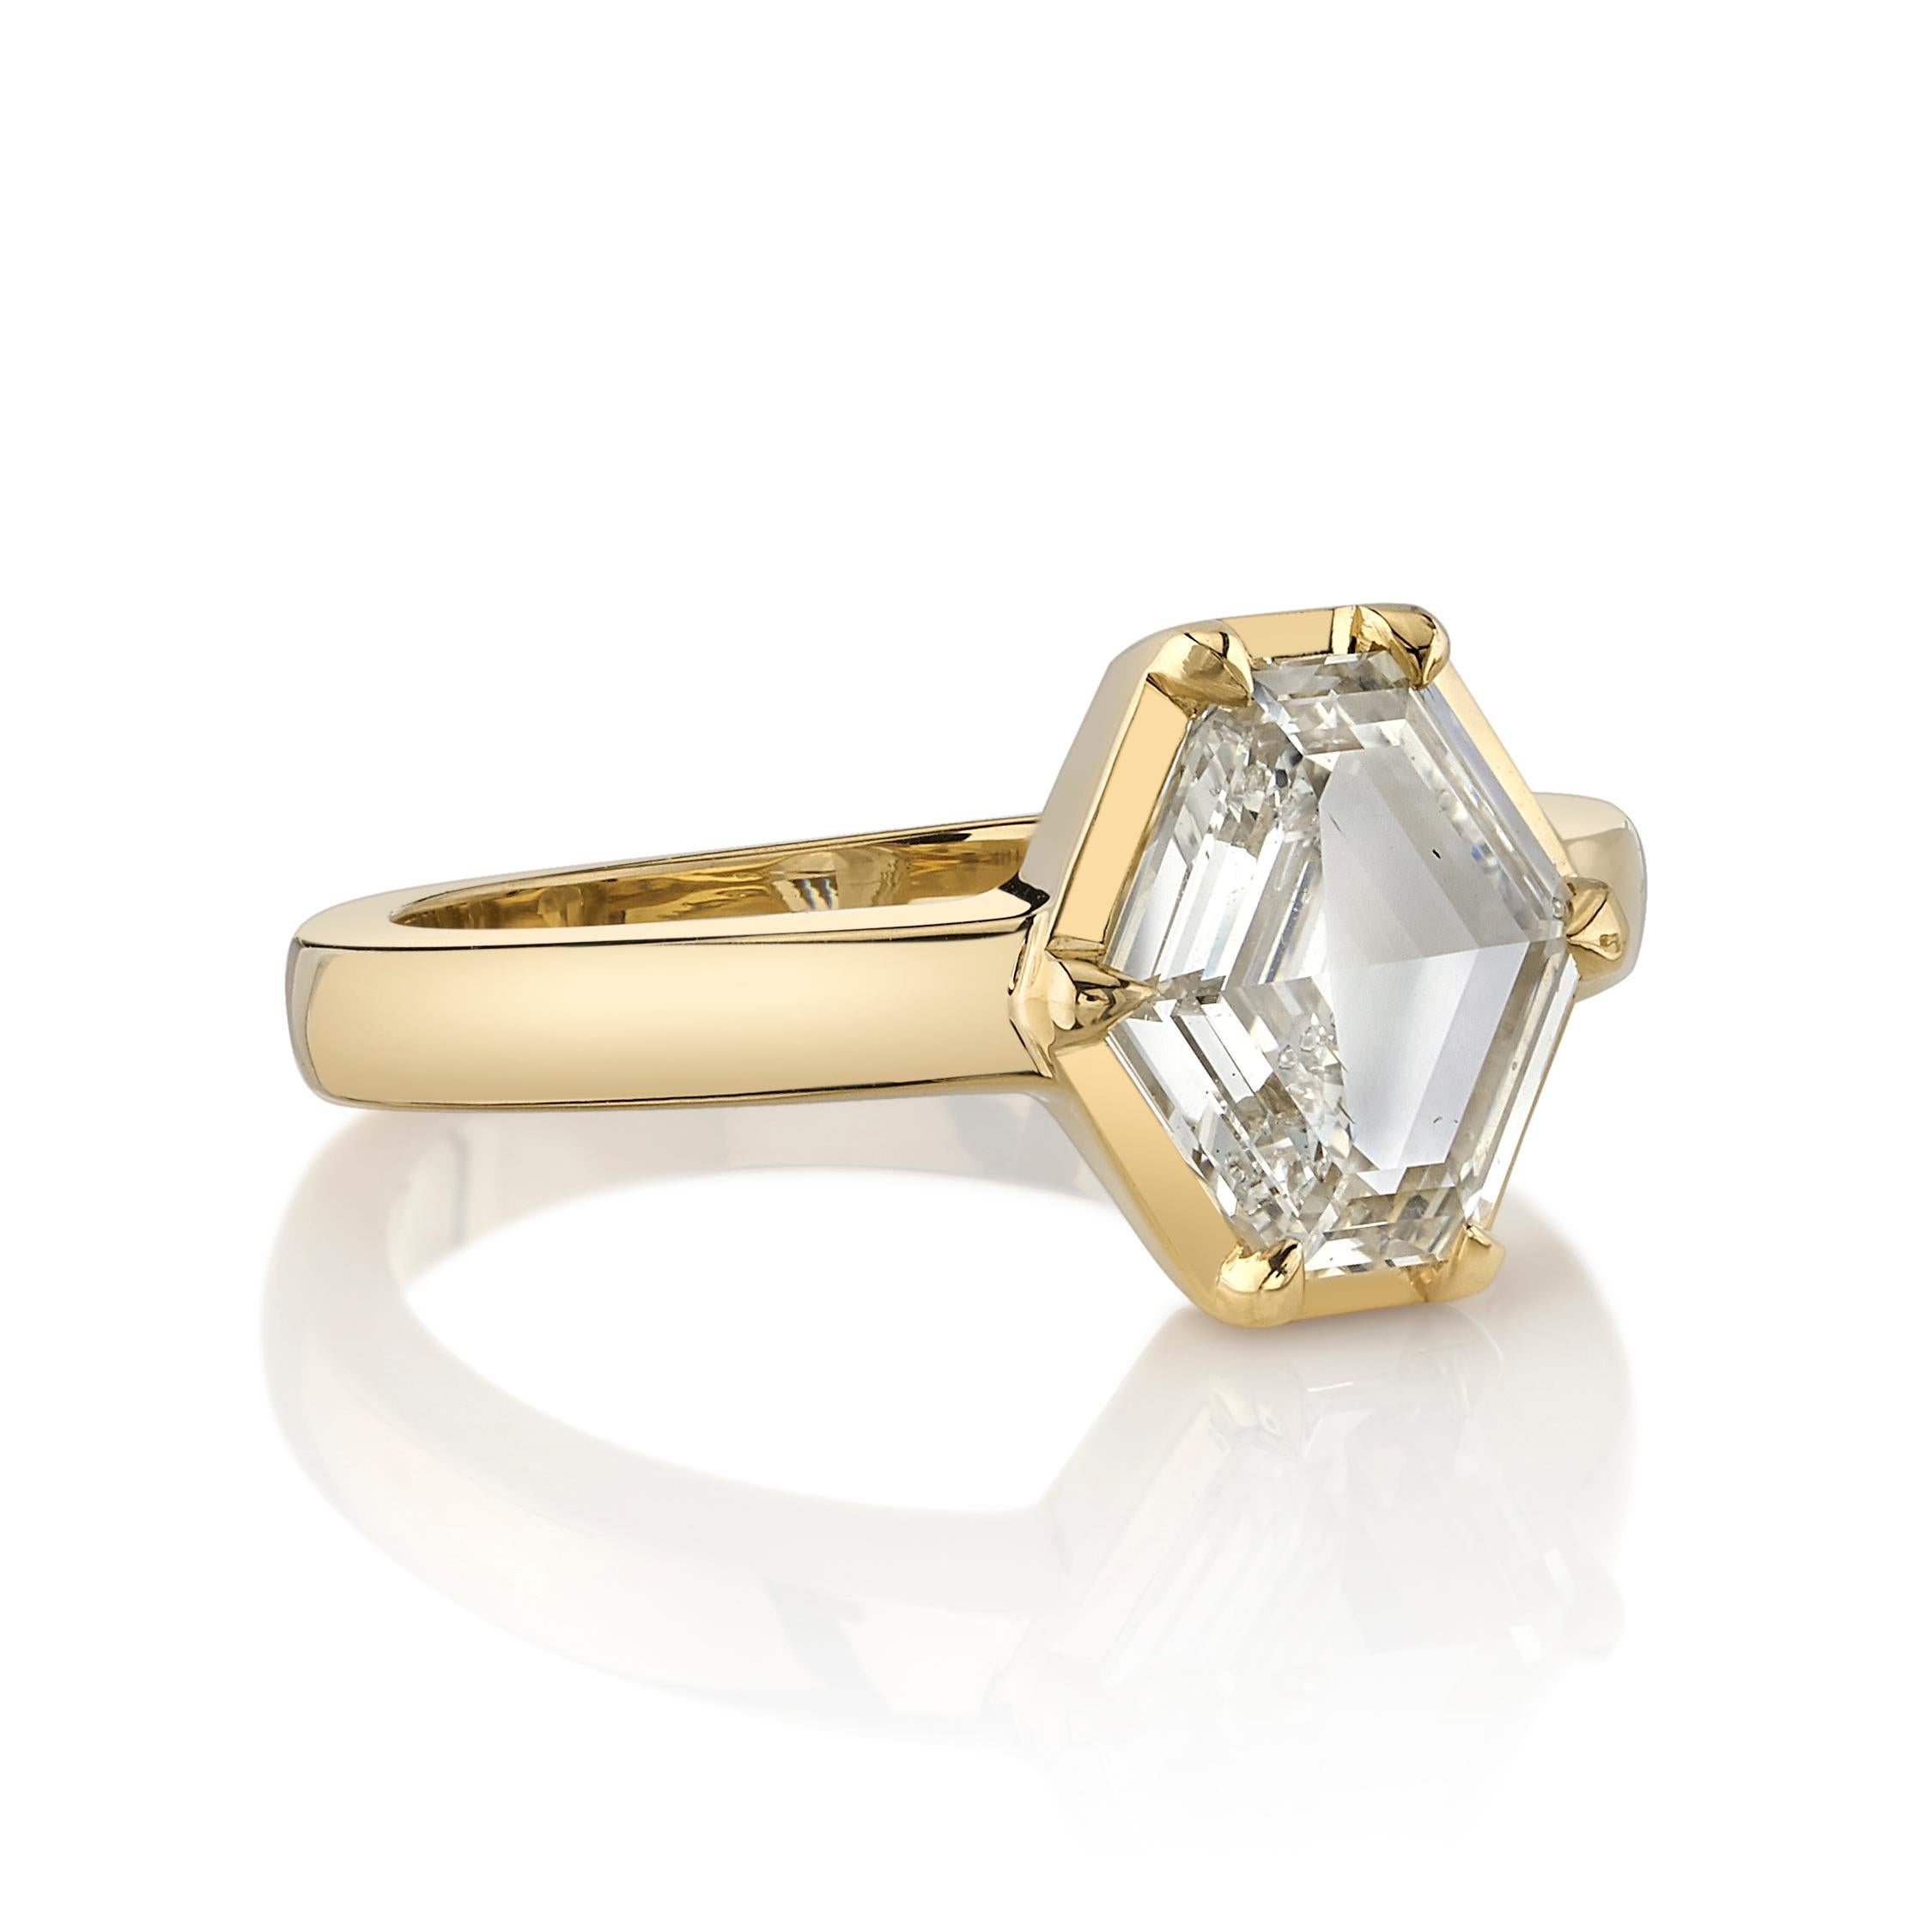 1.66ctw O-P/SI2 GIA certified Hexagonal cut diamond set in a handcrafted 18K yellow gold mounting.

Our jewelry is made locally in Los Angeles and most pieces are made to order. For these made-to-order items, please allow 8-10 weeks for delivery.